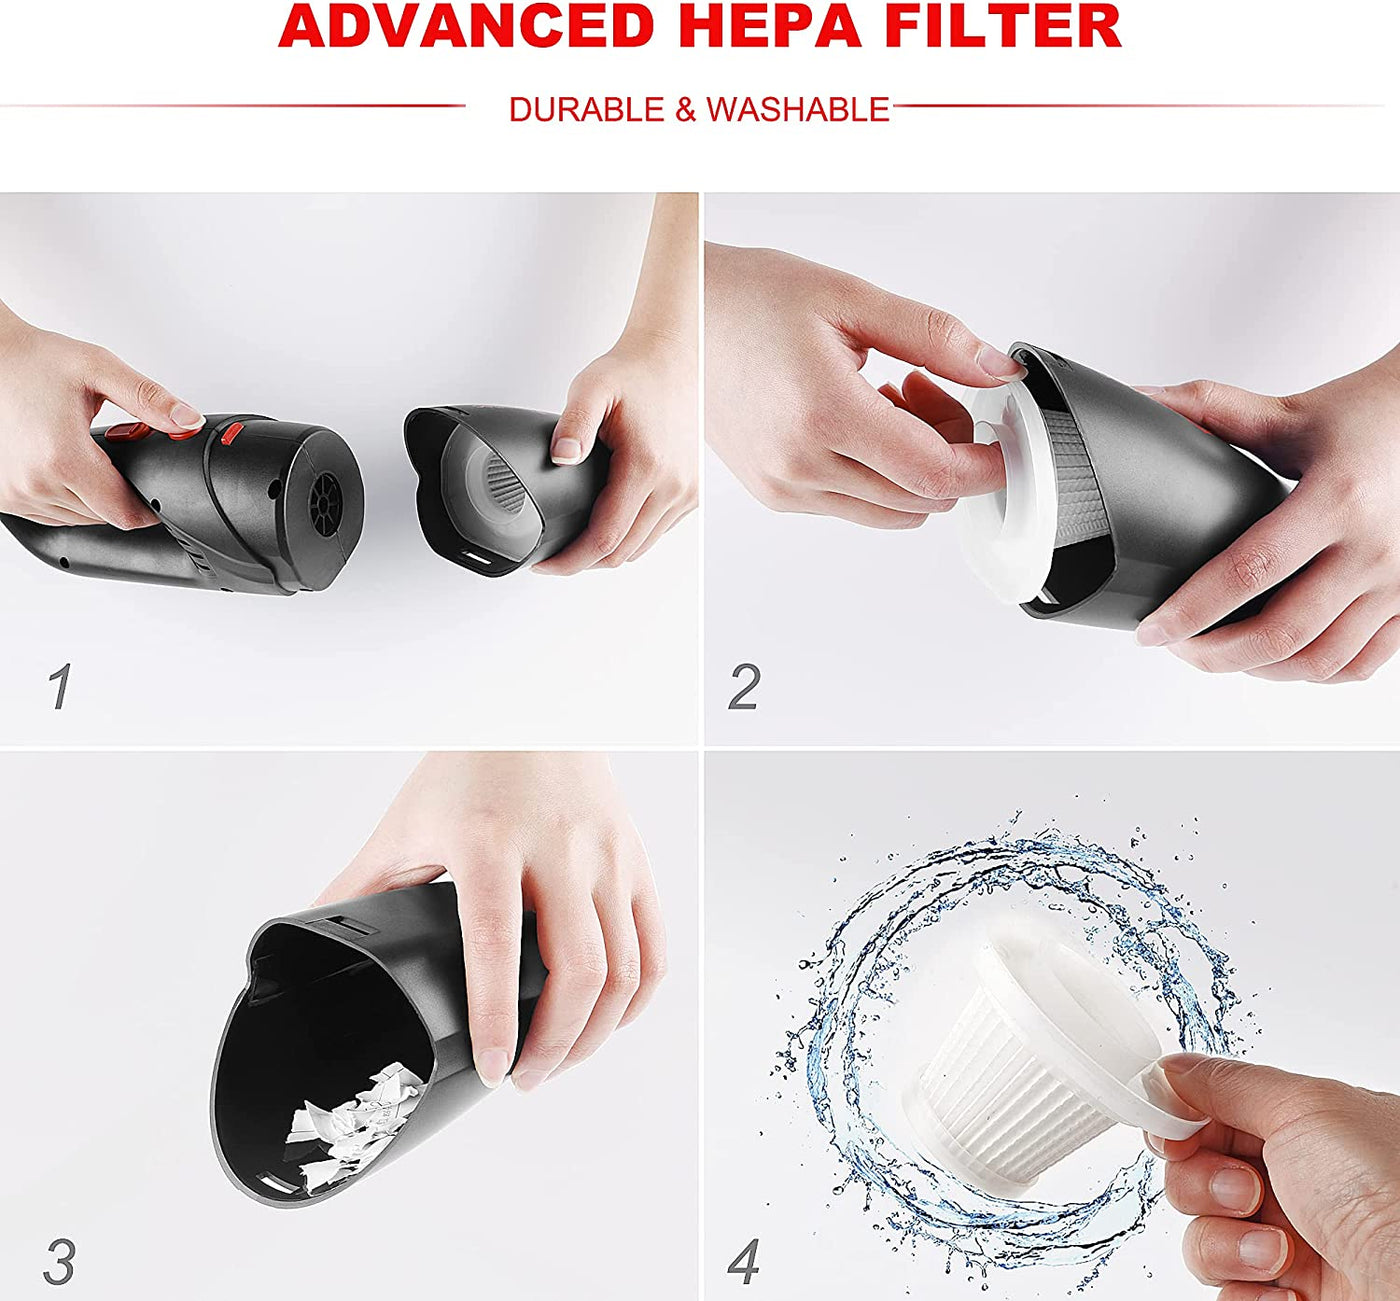 Portable Lightweight Corded Vehicle Handheld Vacuum with 6500Pa Strong Suction & Washable Filter